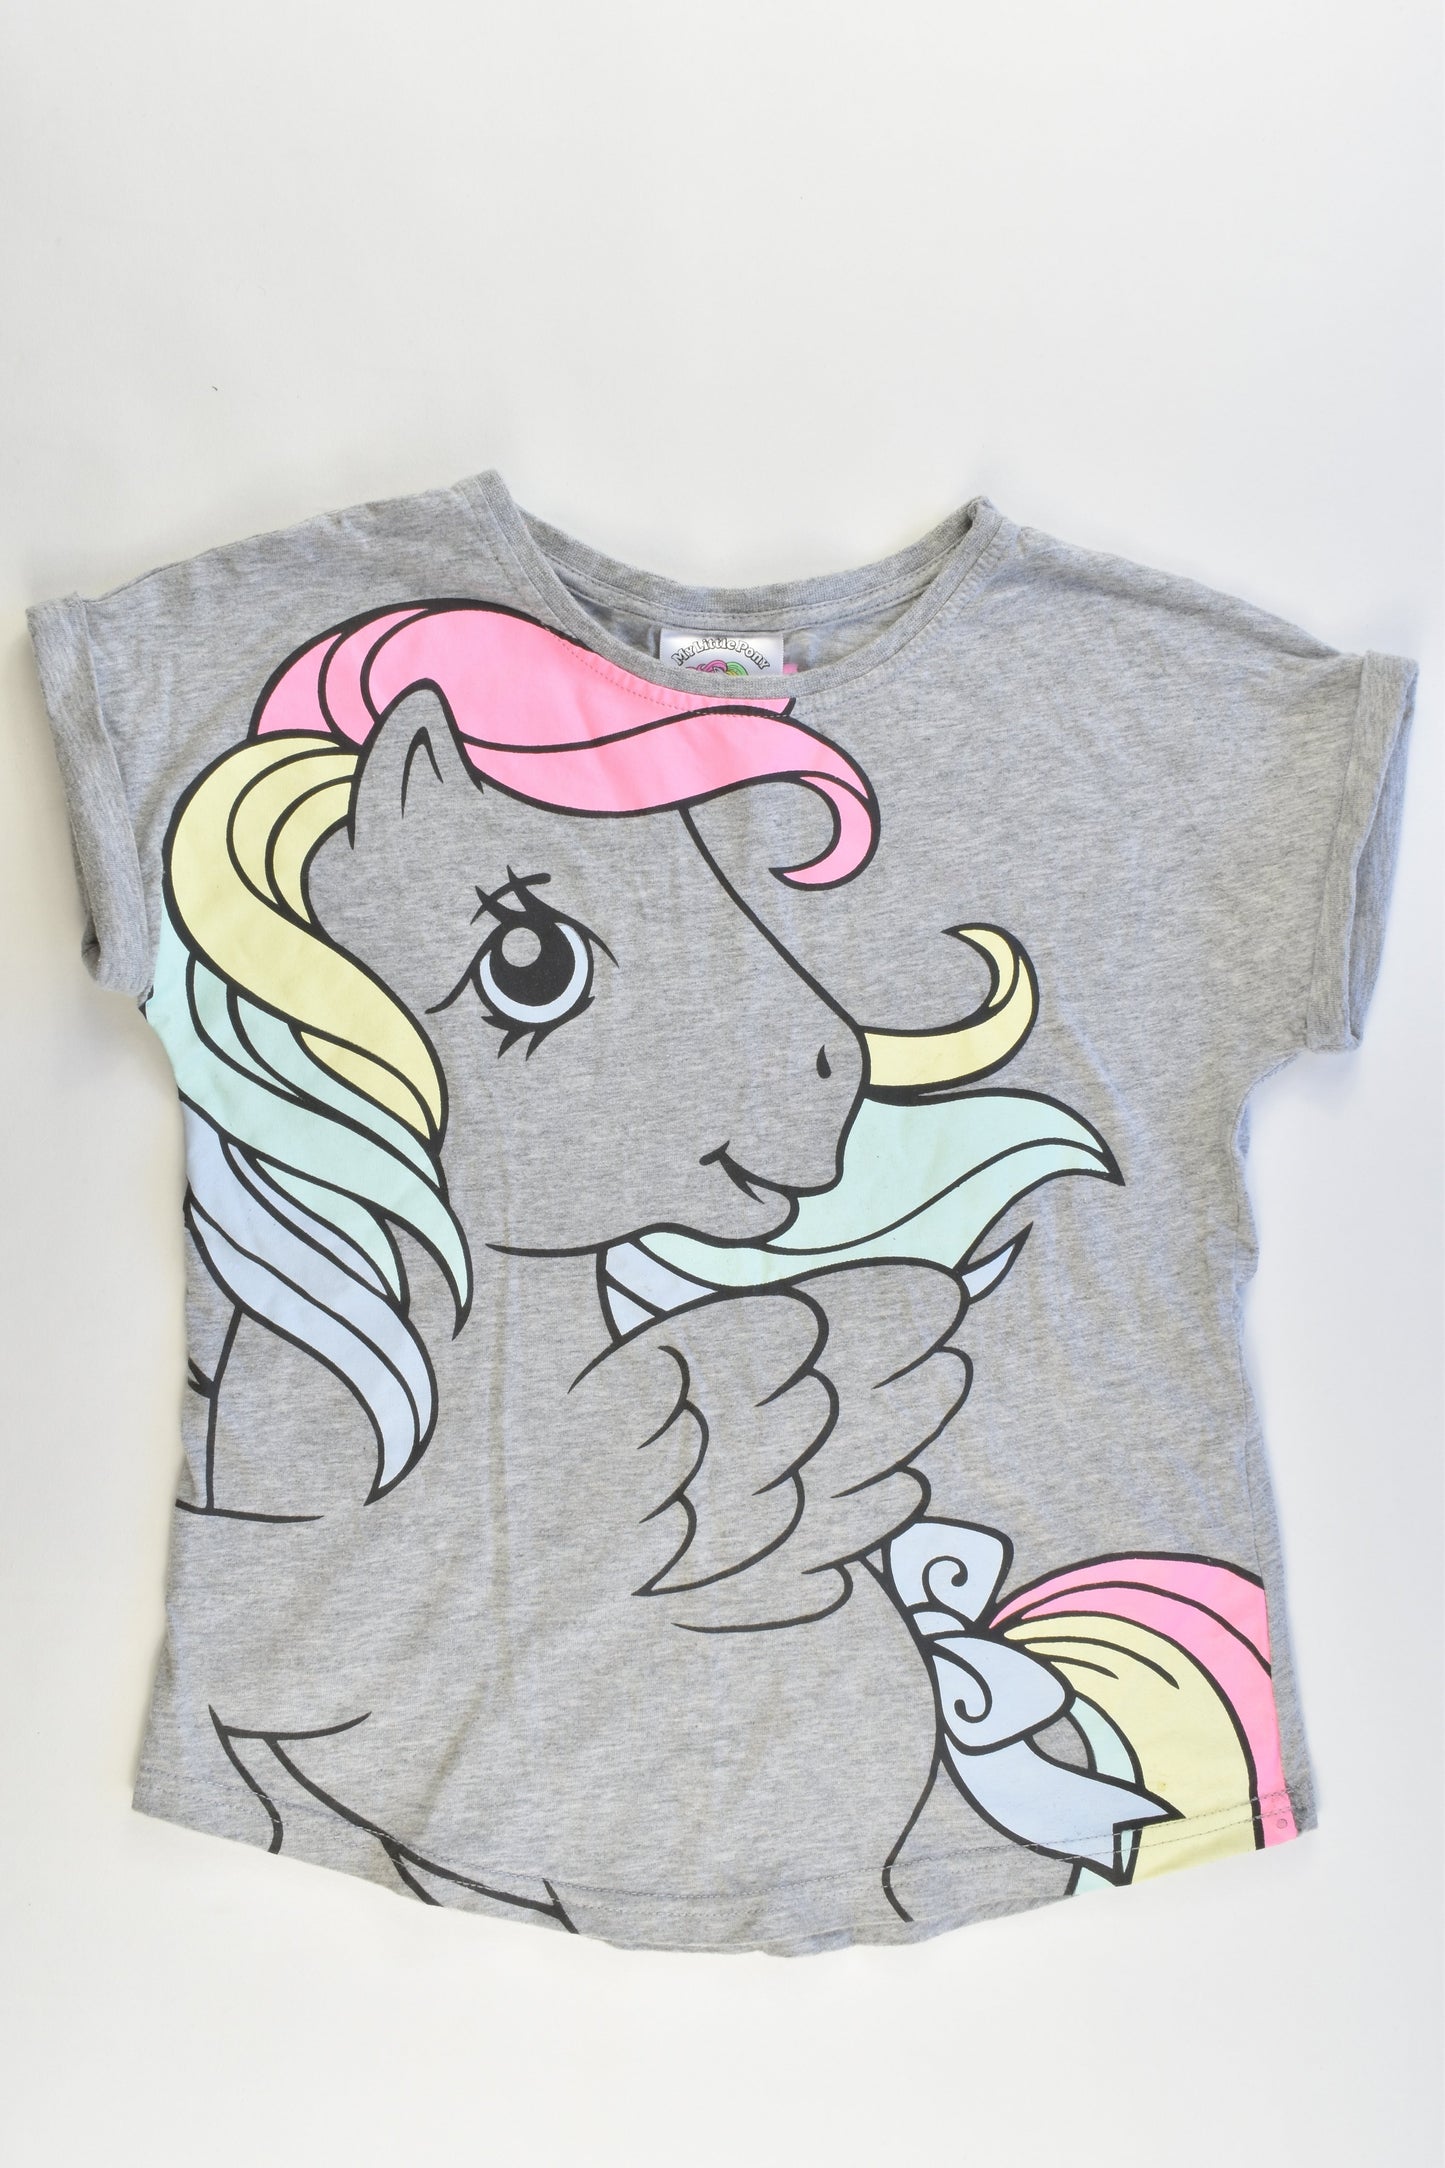 My Little Pony by Cotton On Kids Size 7 T-shirt